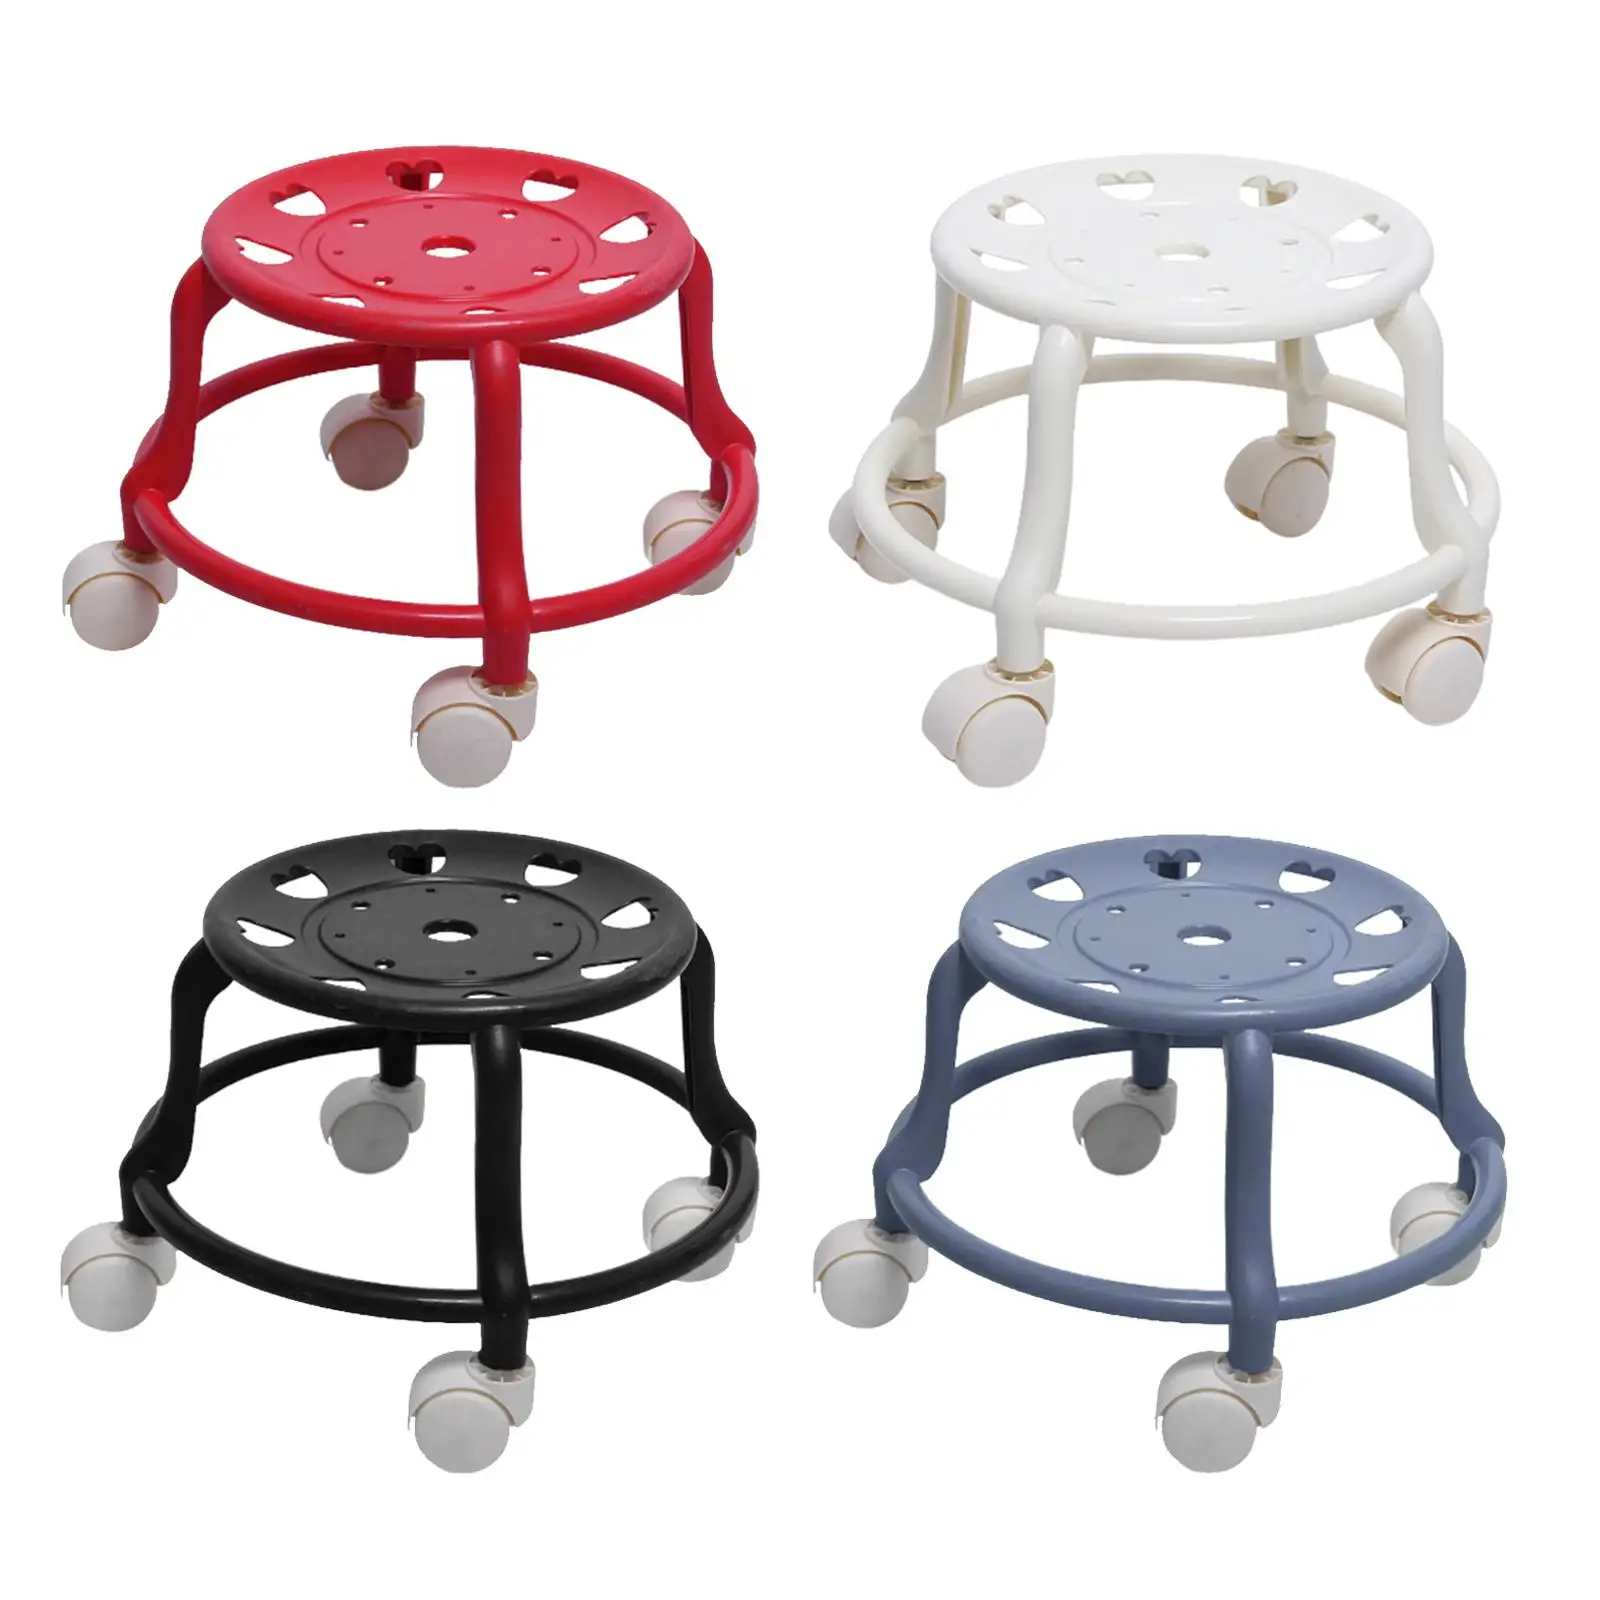 Low Rolling Stool Small Sturdy Lazy Housework Stool Swivel Roller Seat Universal Swivel Casters for Garage Salon Library Fitness